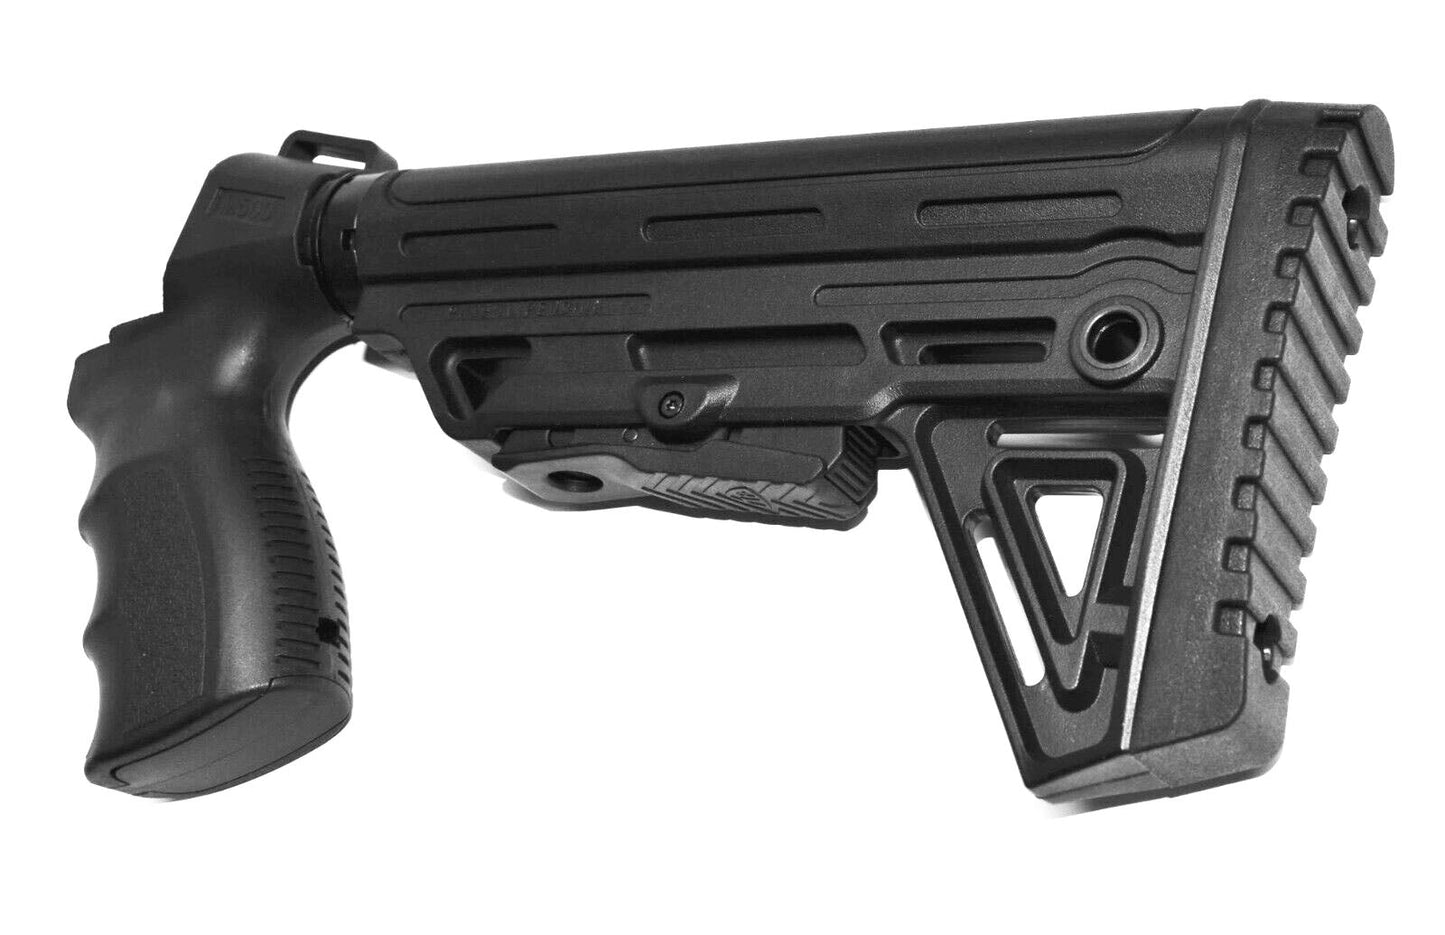 Tactical Fury Stock Compatible With Mossberg 590A1 12 Gauge Pump. - TRINITY SUPPLY INC